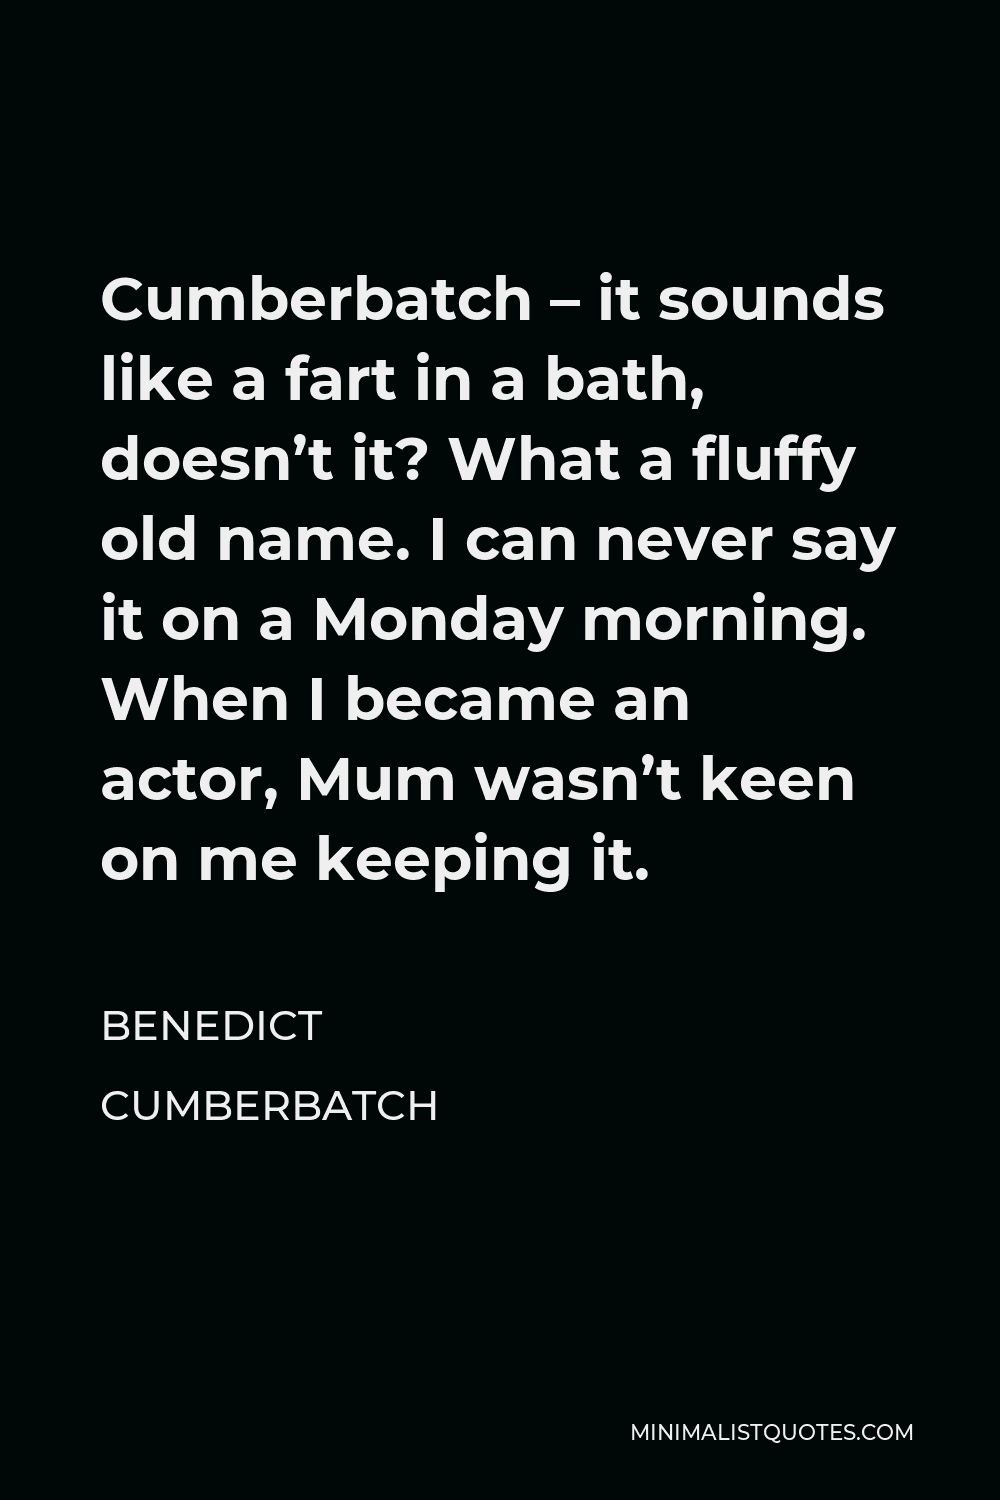 Benedict Cumberbatch Quote - Cumberbatch – it sounds like a fart in a bath, doesn’t it? What a fluffy old name. I can never say it on a Monday morning. When I became an actor, Mum wasn’t keen on me keeping it.